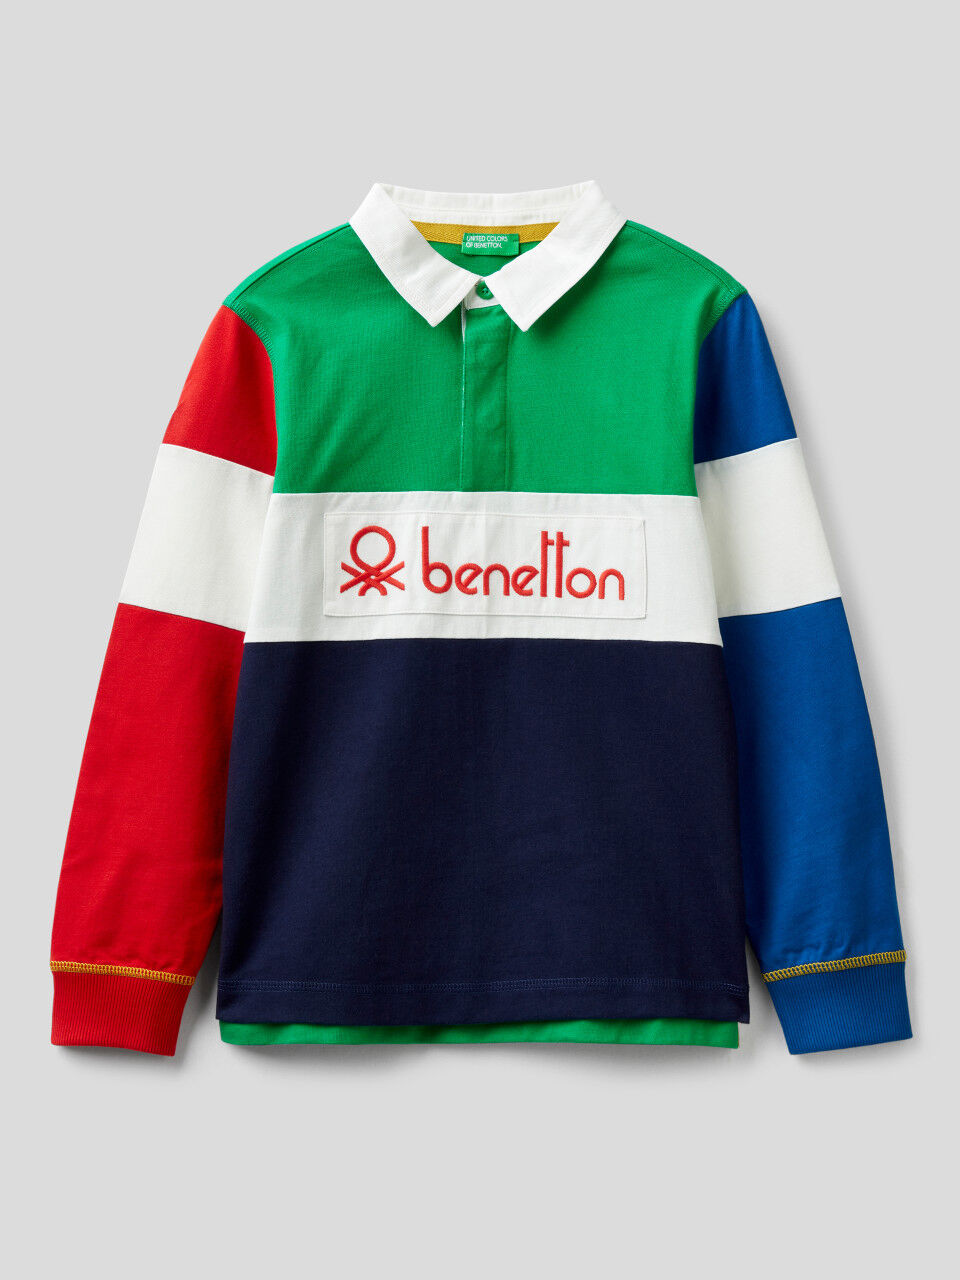 Kinder Jungs Shirts Benetton Polo Tops und Hemden Poloshirts United Colors of Benetton Poloshirts 